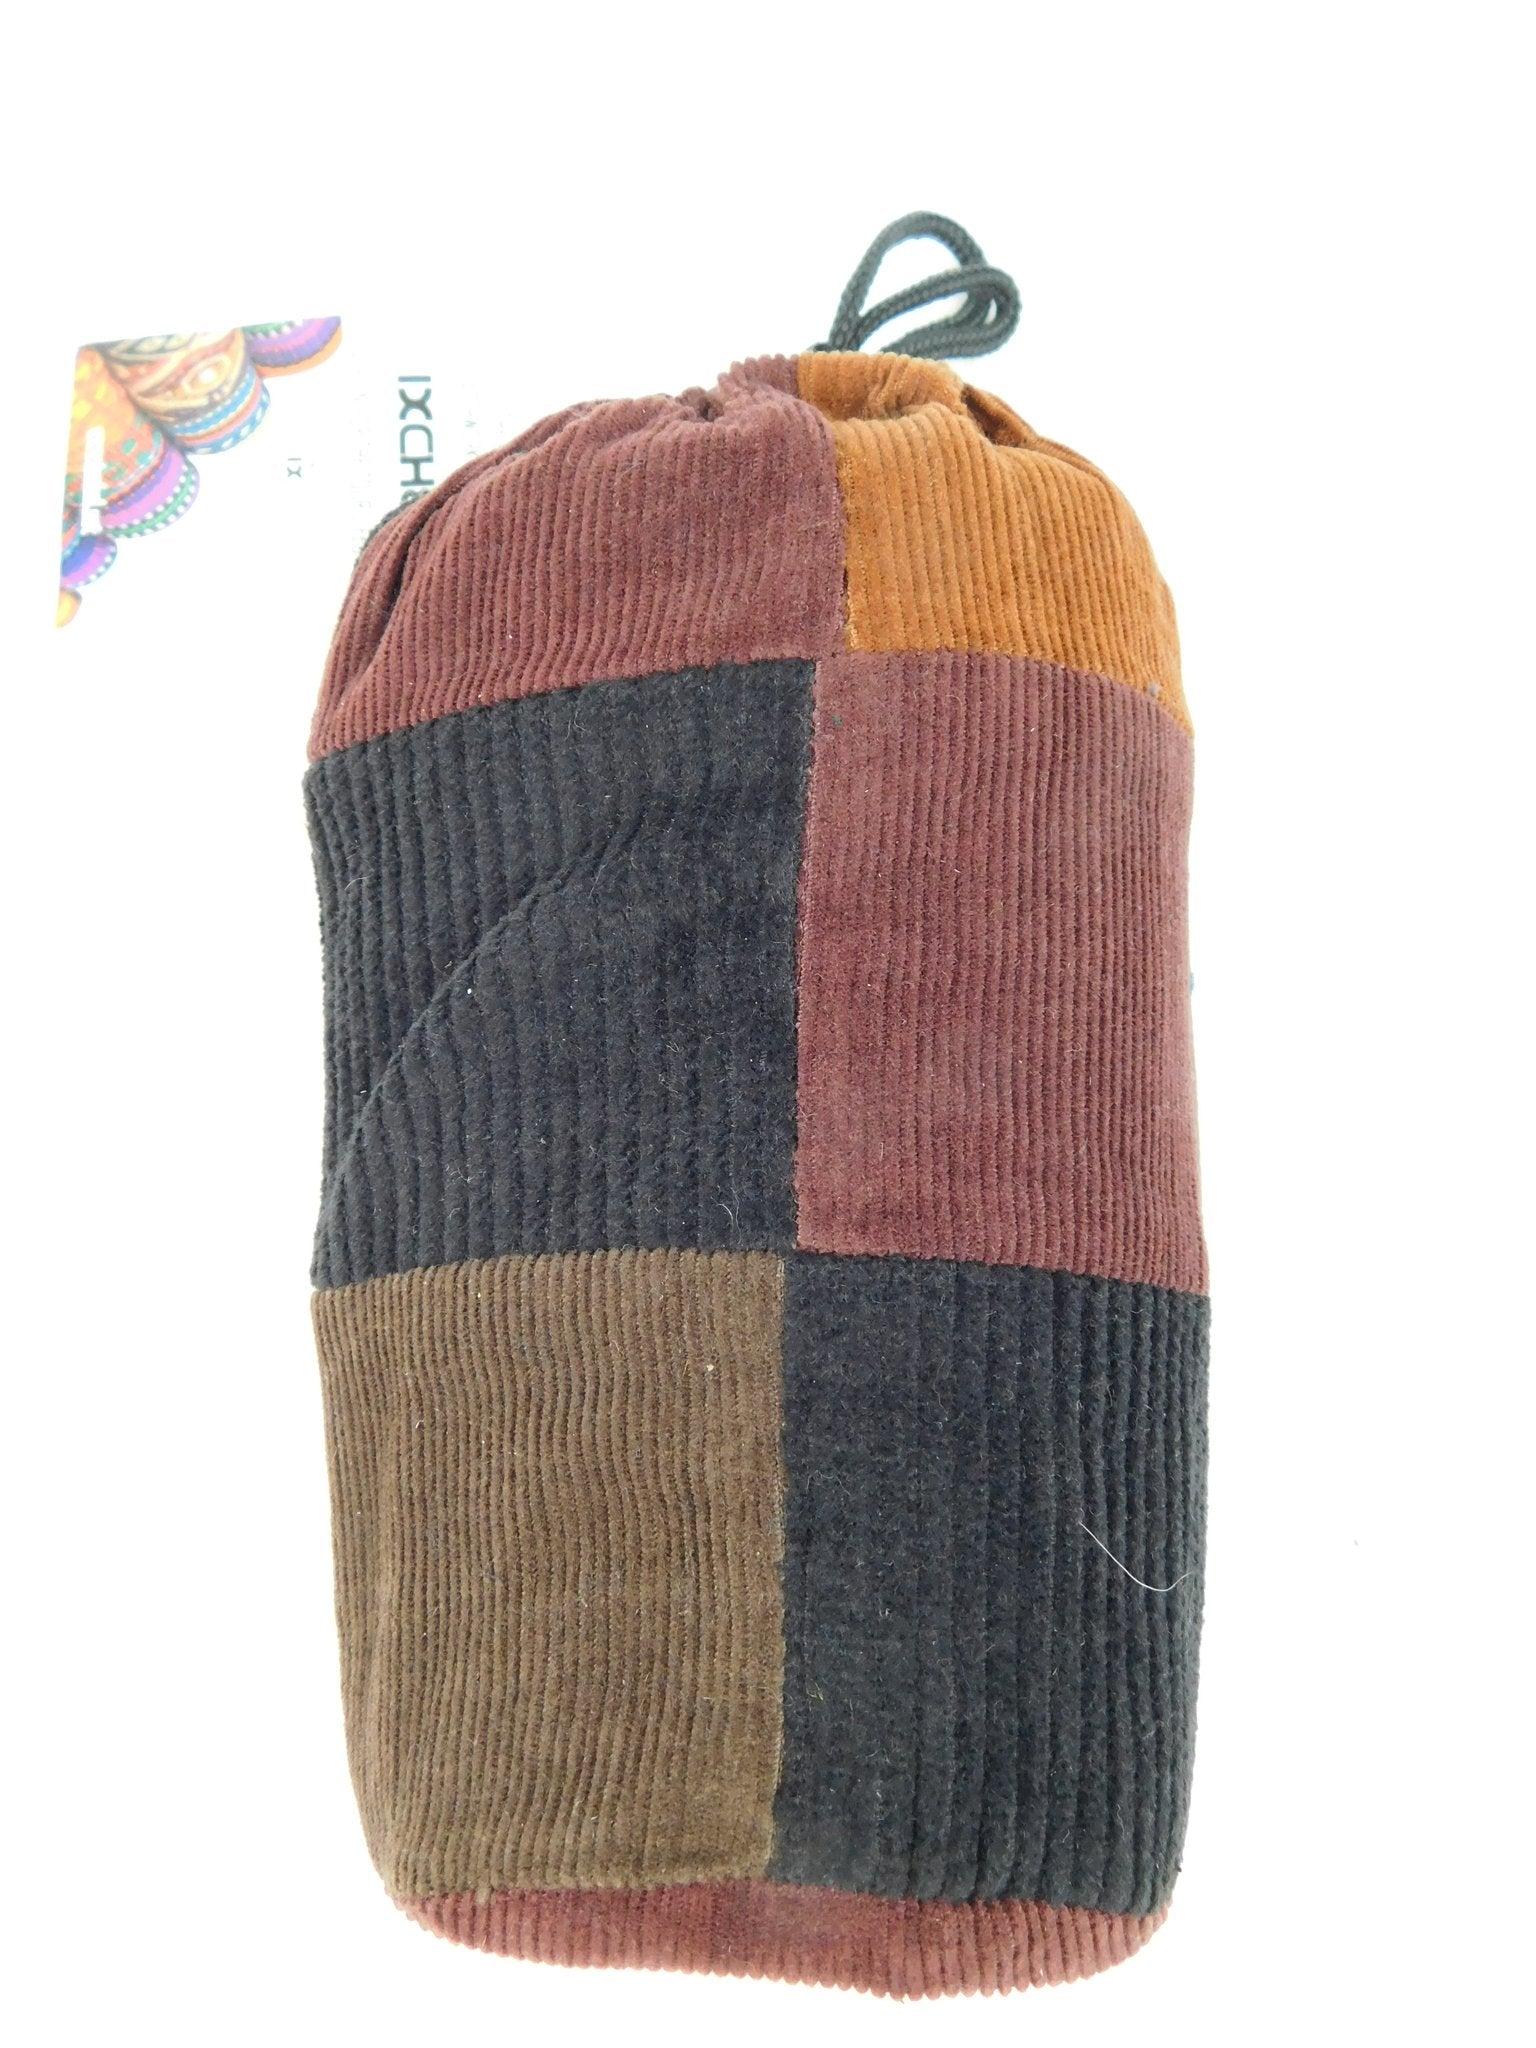 Protective Pouch - Patchwork Corduroy 6"